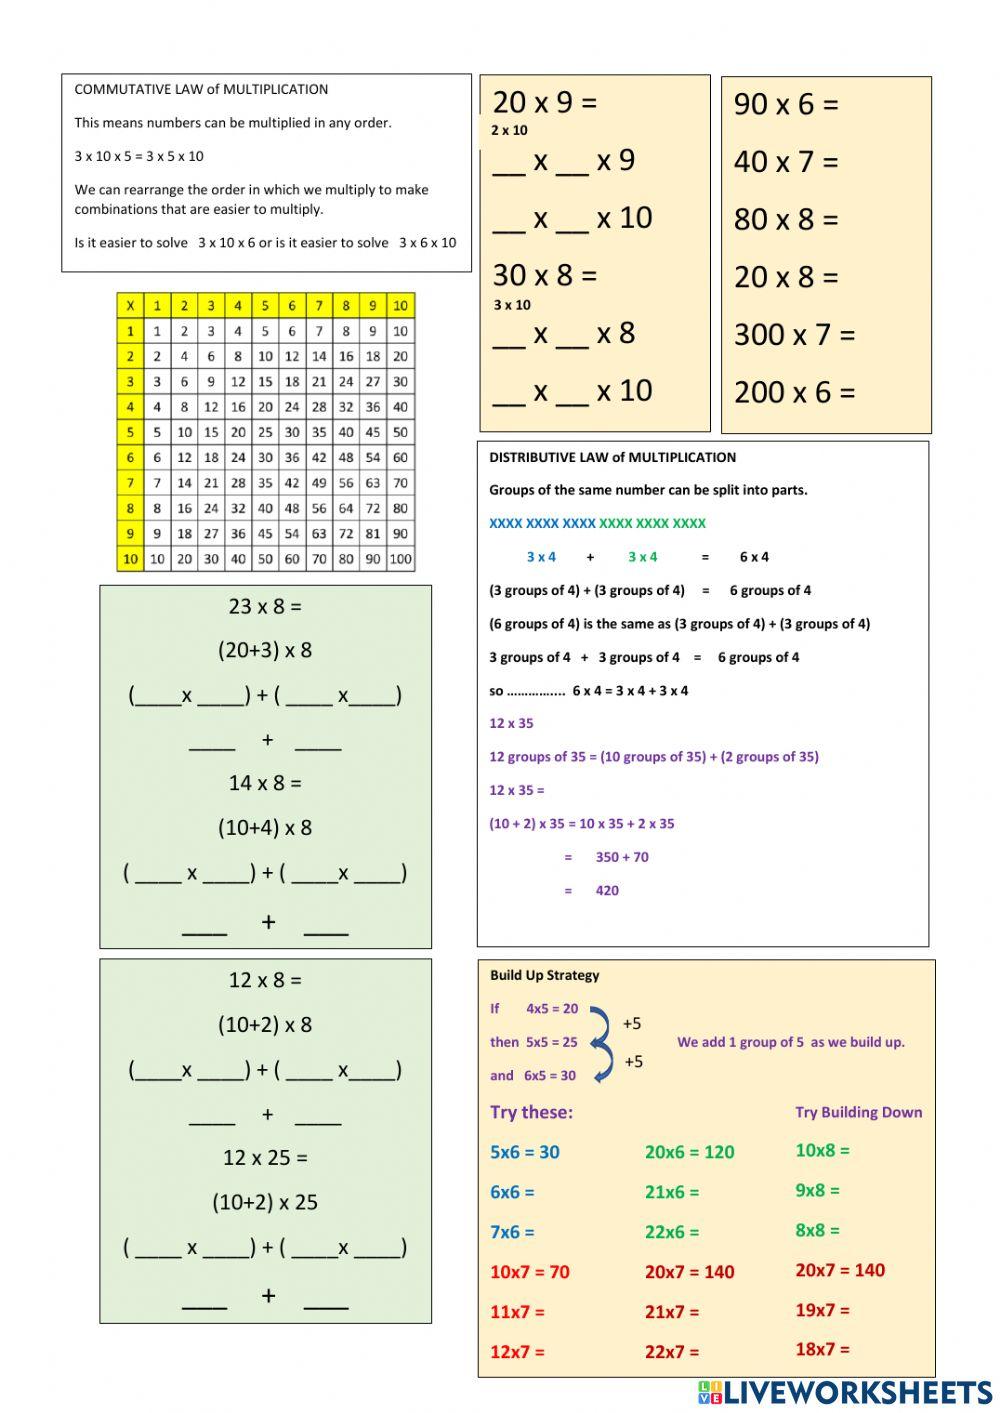 CHILL- Multiplication Distributive and Communitive Laws Set 1